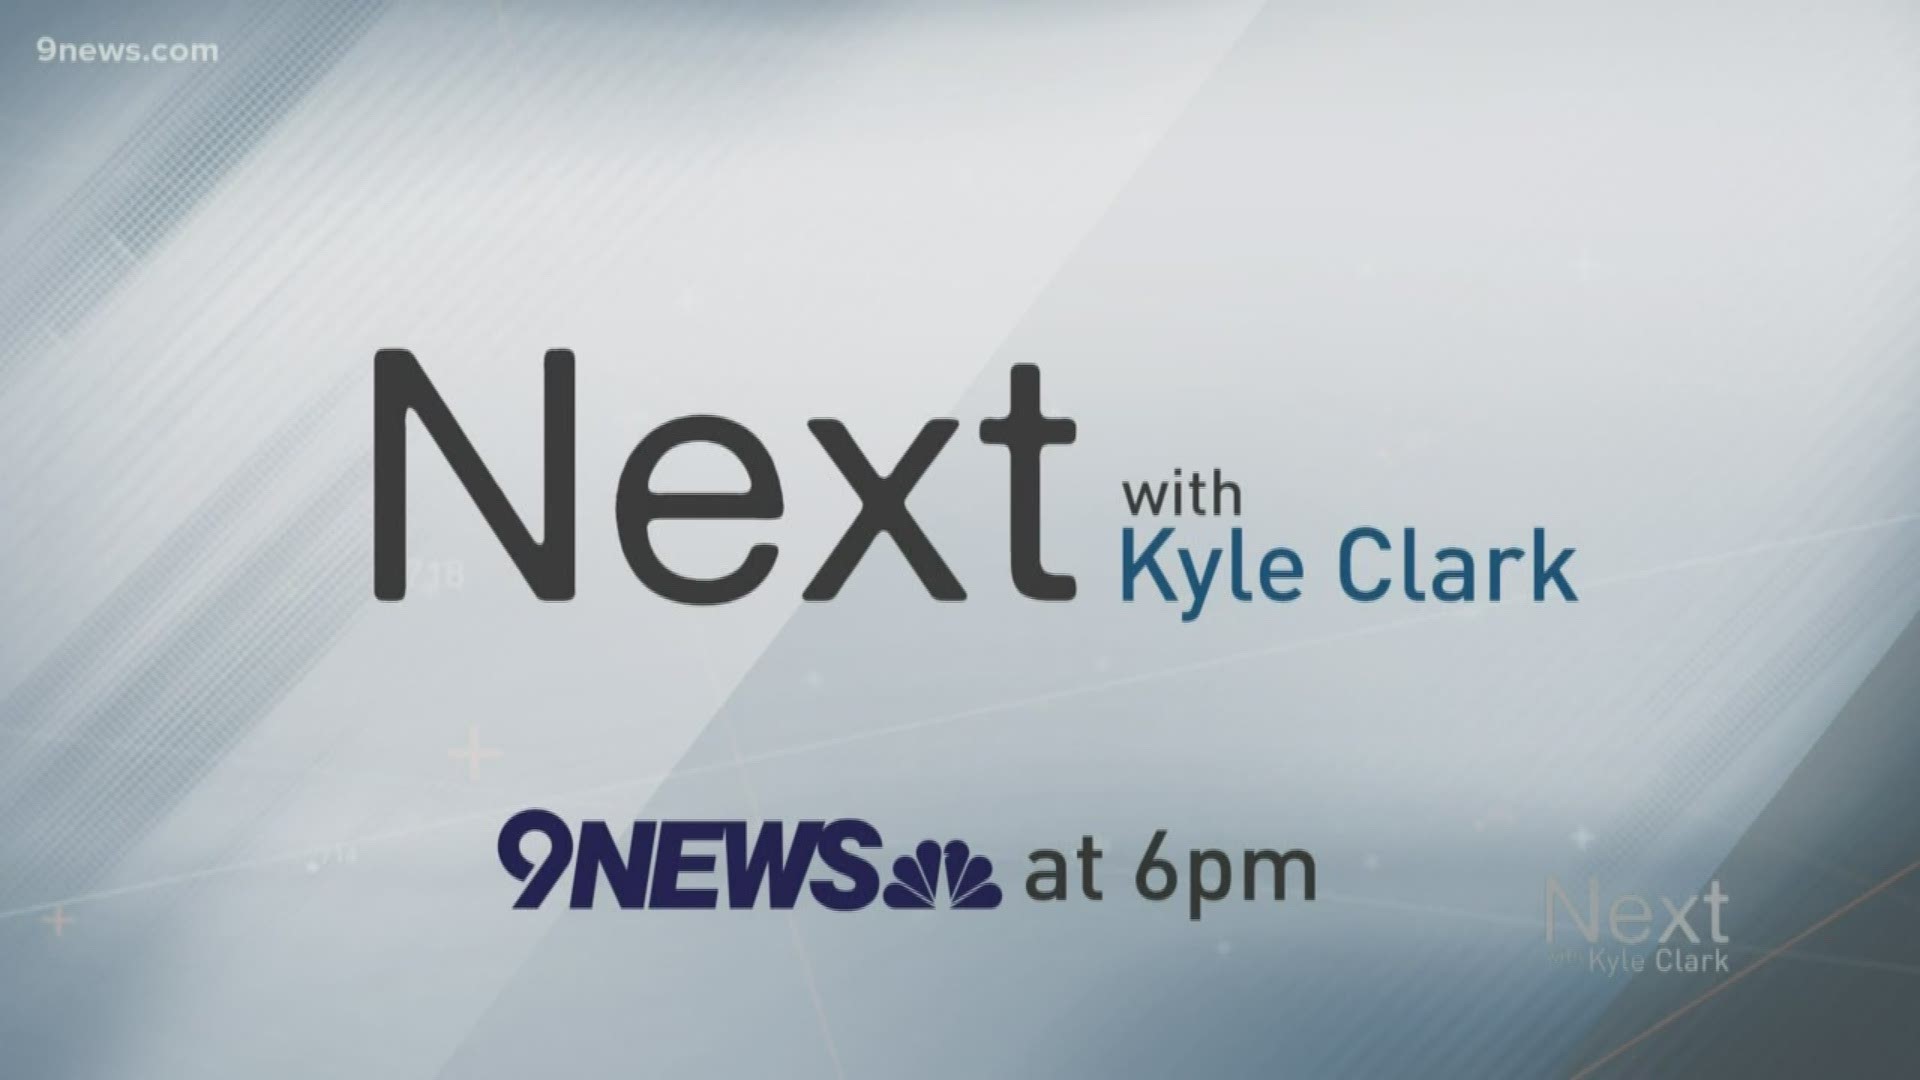 Watch this full episode of Next with Kyle Clark. 9NEWS at 6 p.m. 10/15/19.